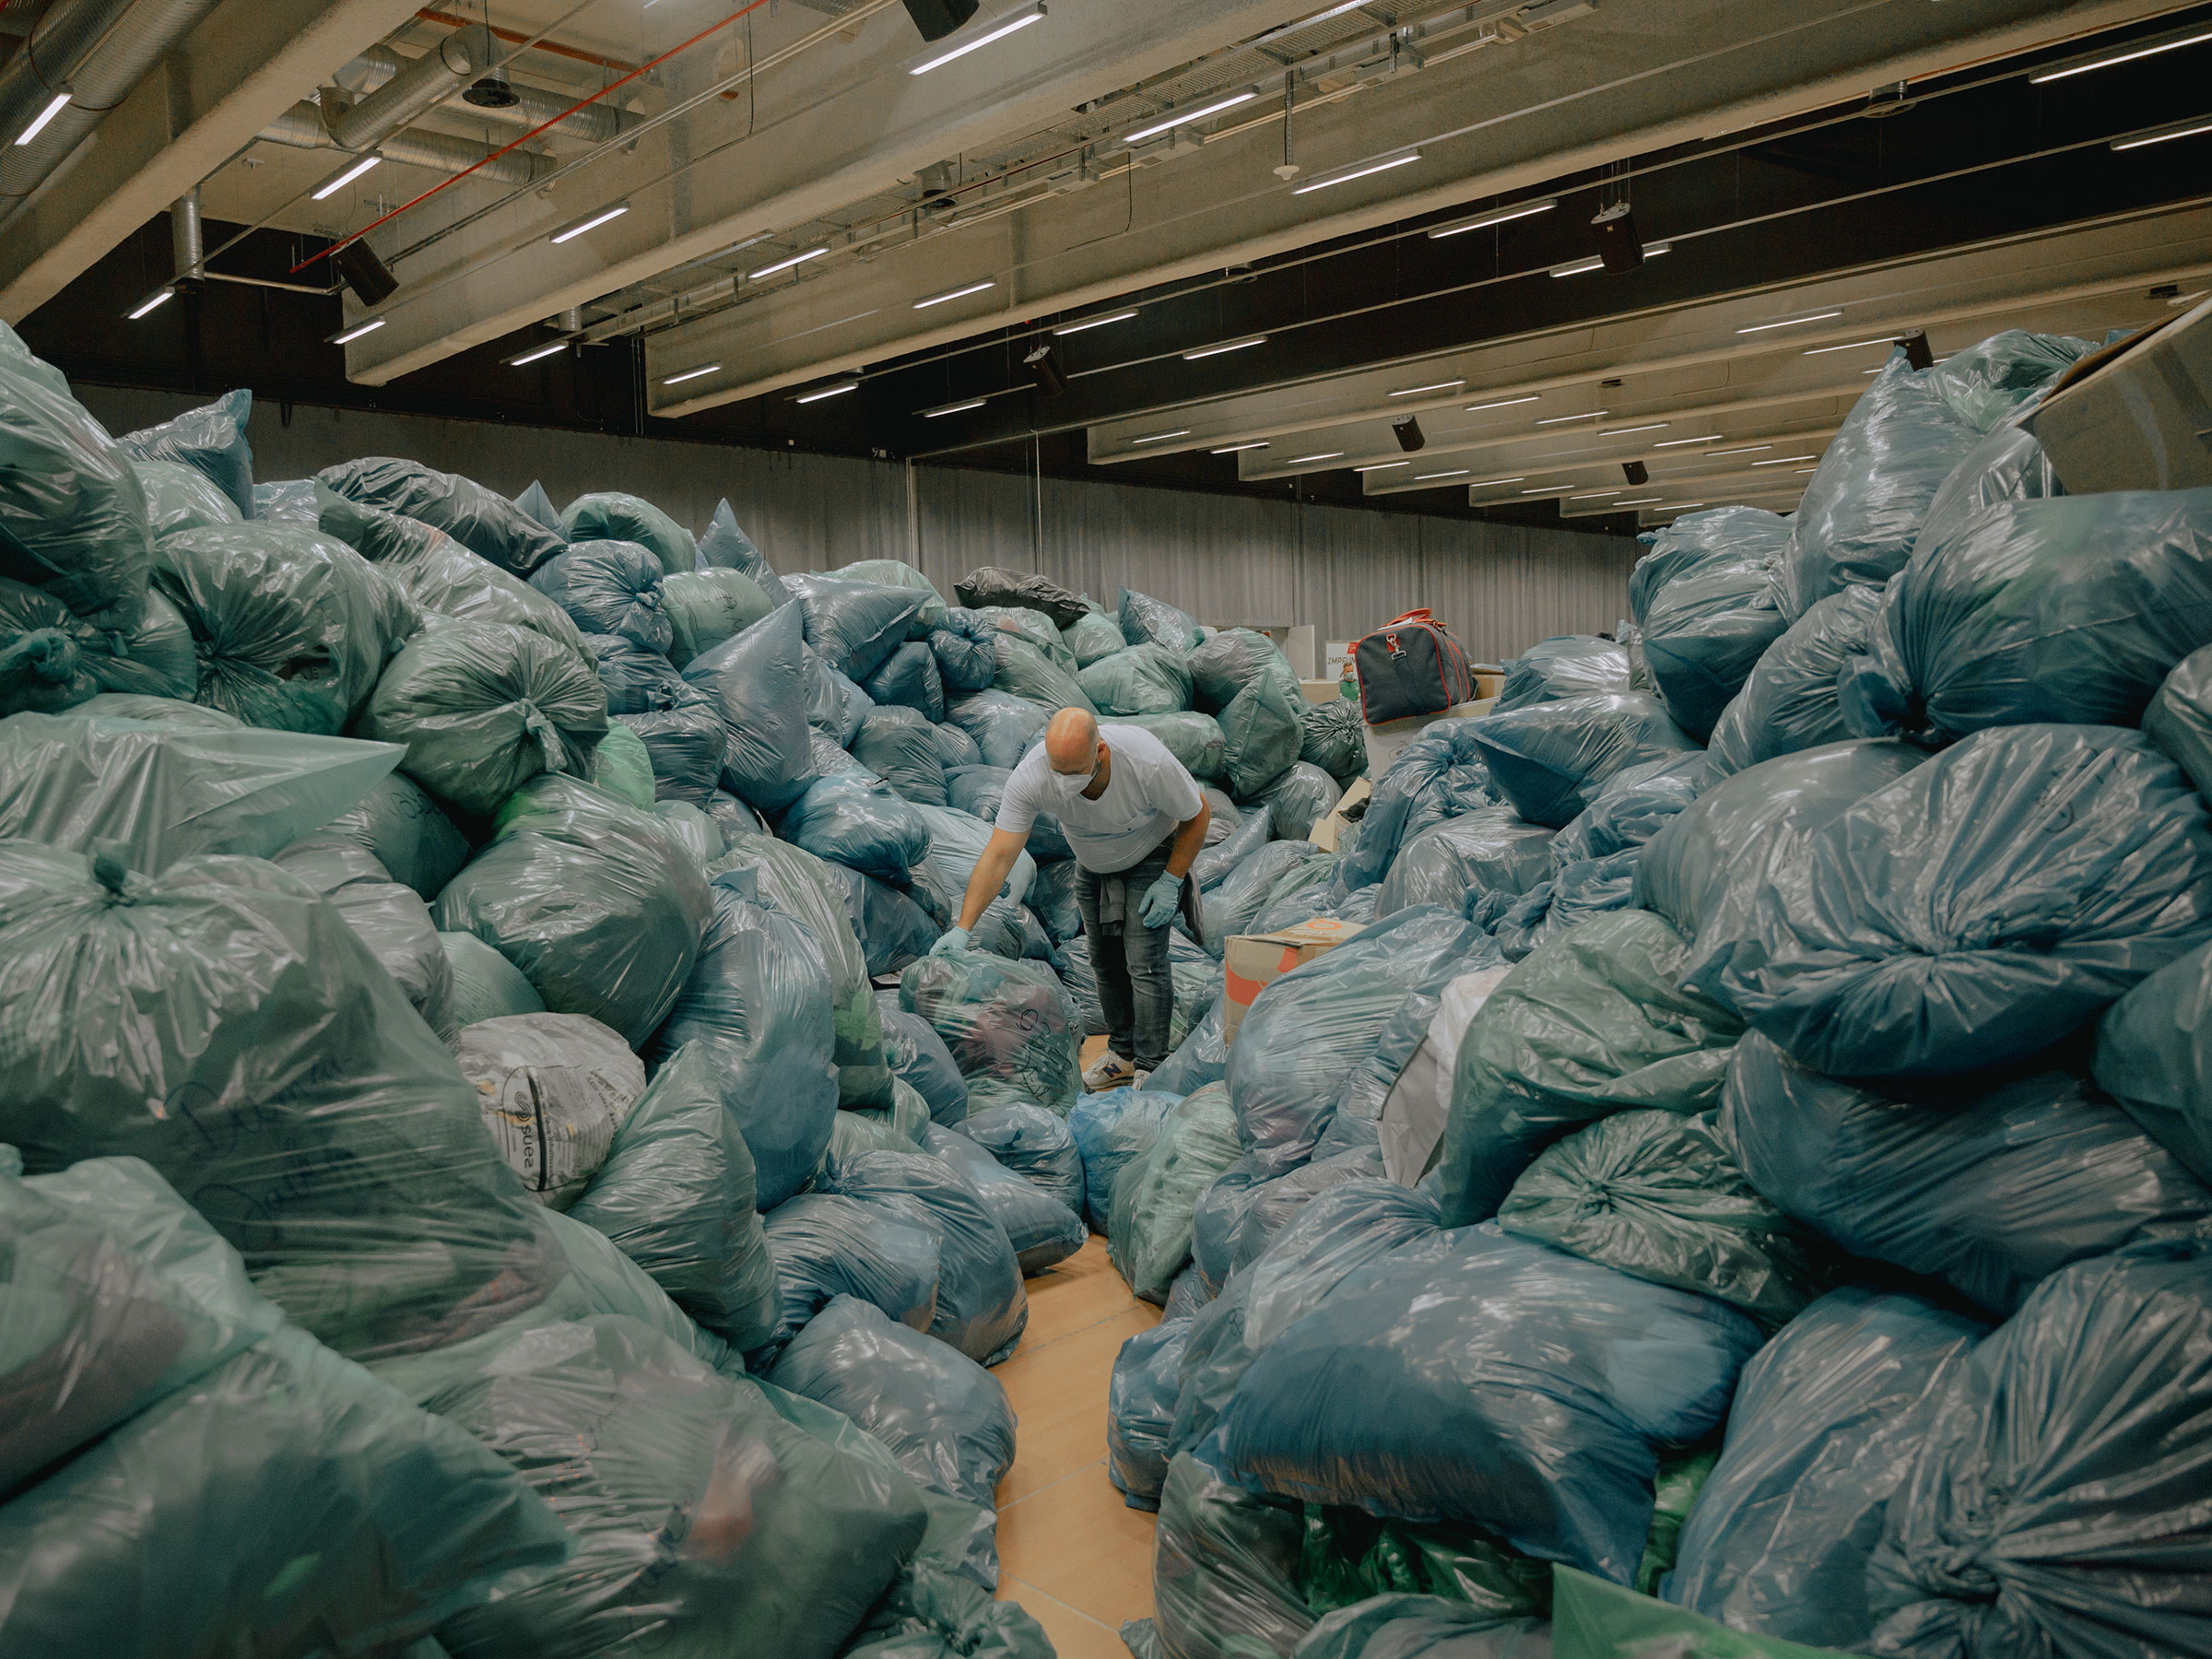 Hundreds of people have volunteered to sort through donations for flood victims at a collection point in Nürburgring, Germany, on July 16. (DOCKS Collective)